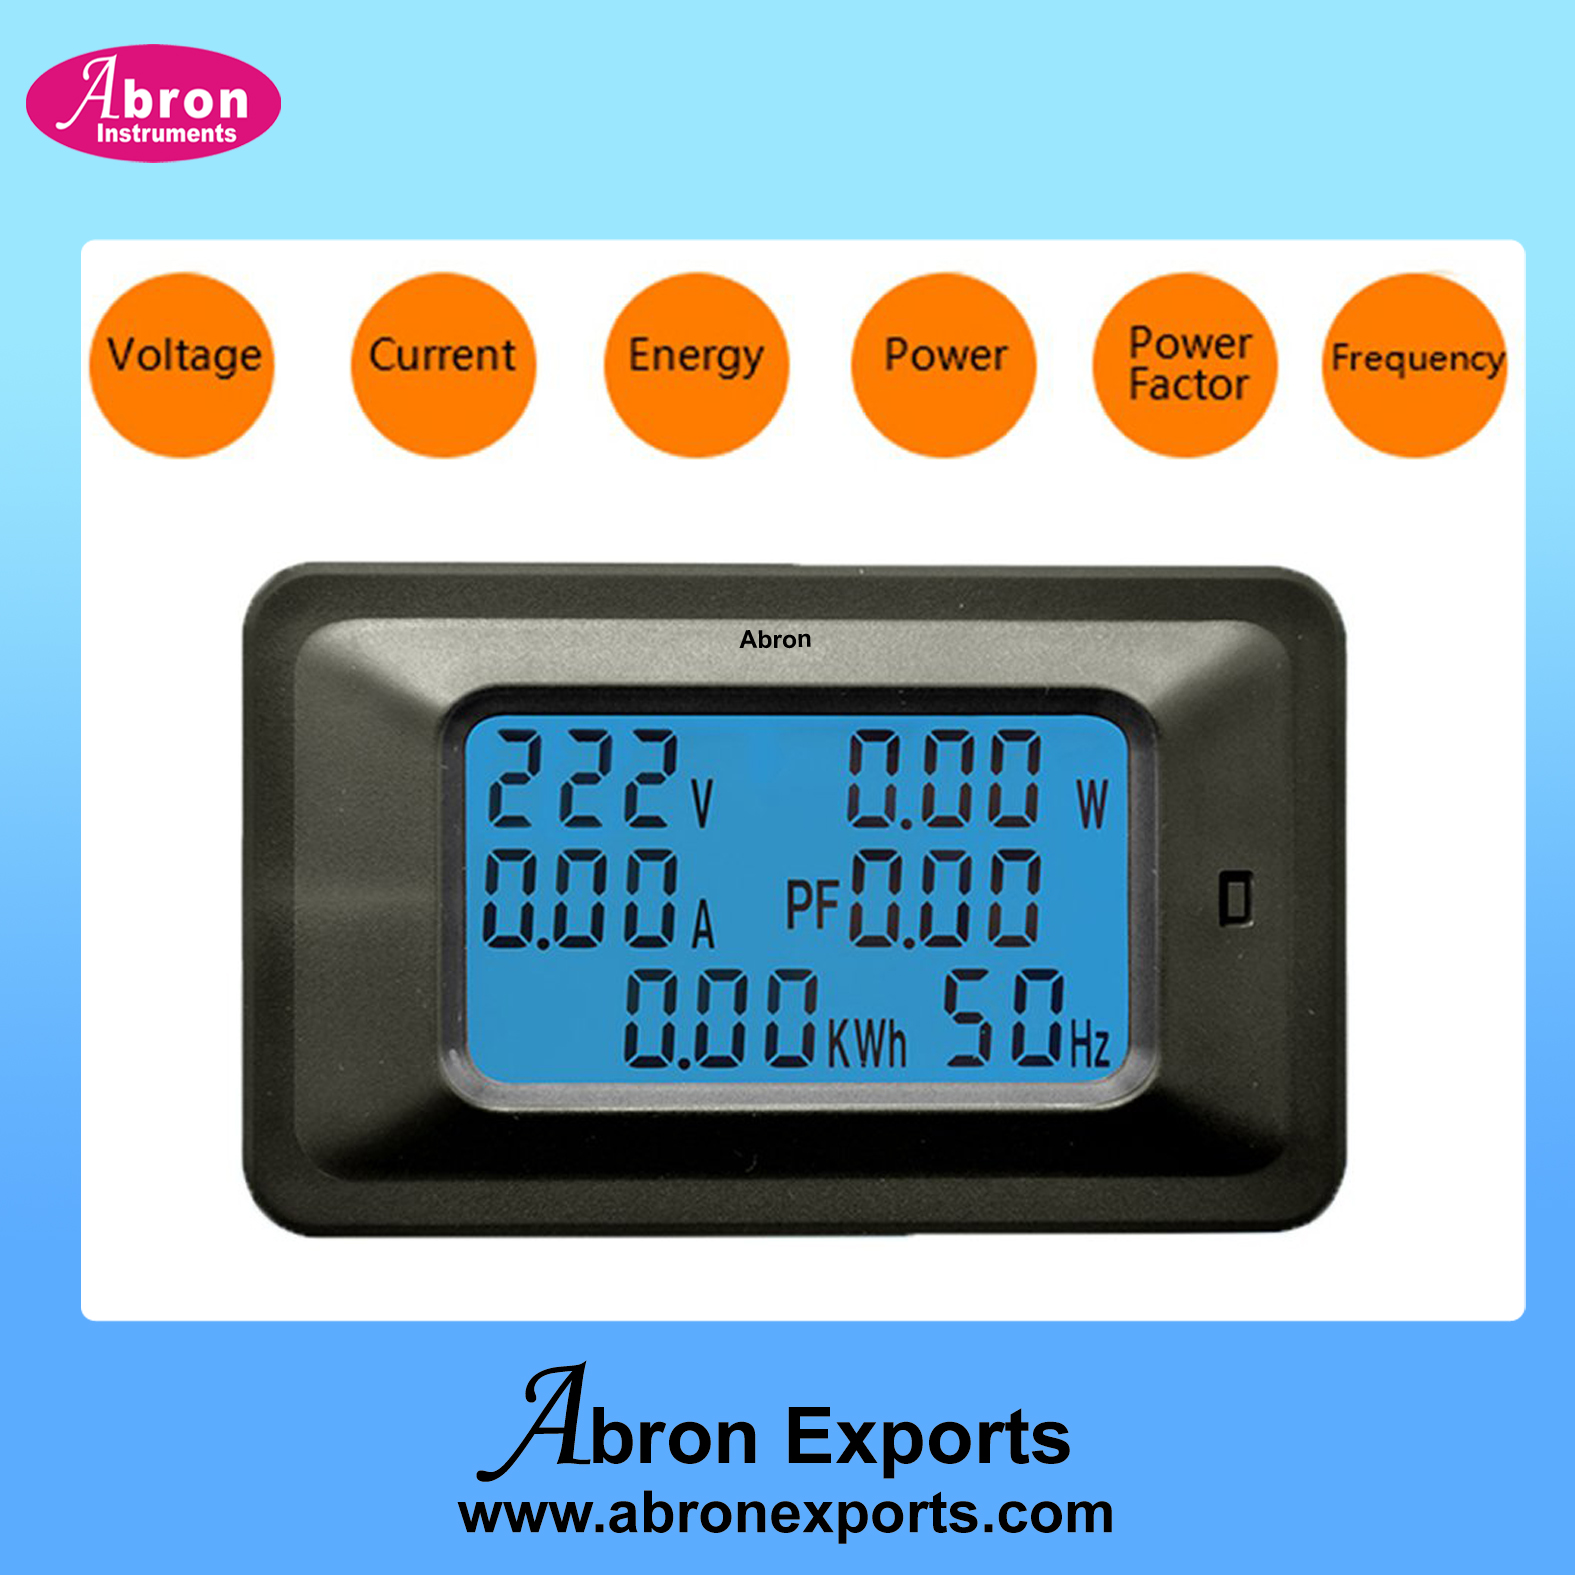 Frequency Meter Digital mains AC +power factor Digital Voltage Meter Energy Meter LCD 5KW Frequency Current watt Tester Detector Indicator AE-1433PF	 or AE-1304PF